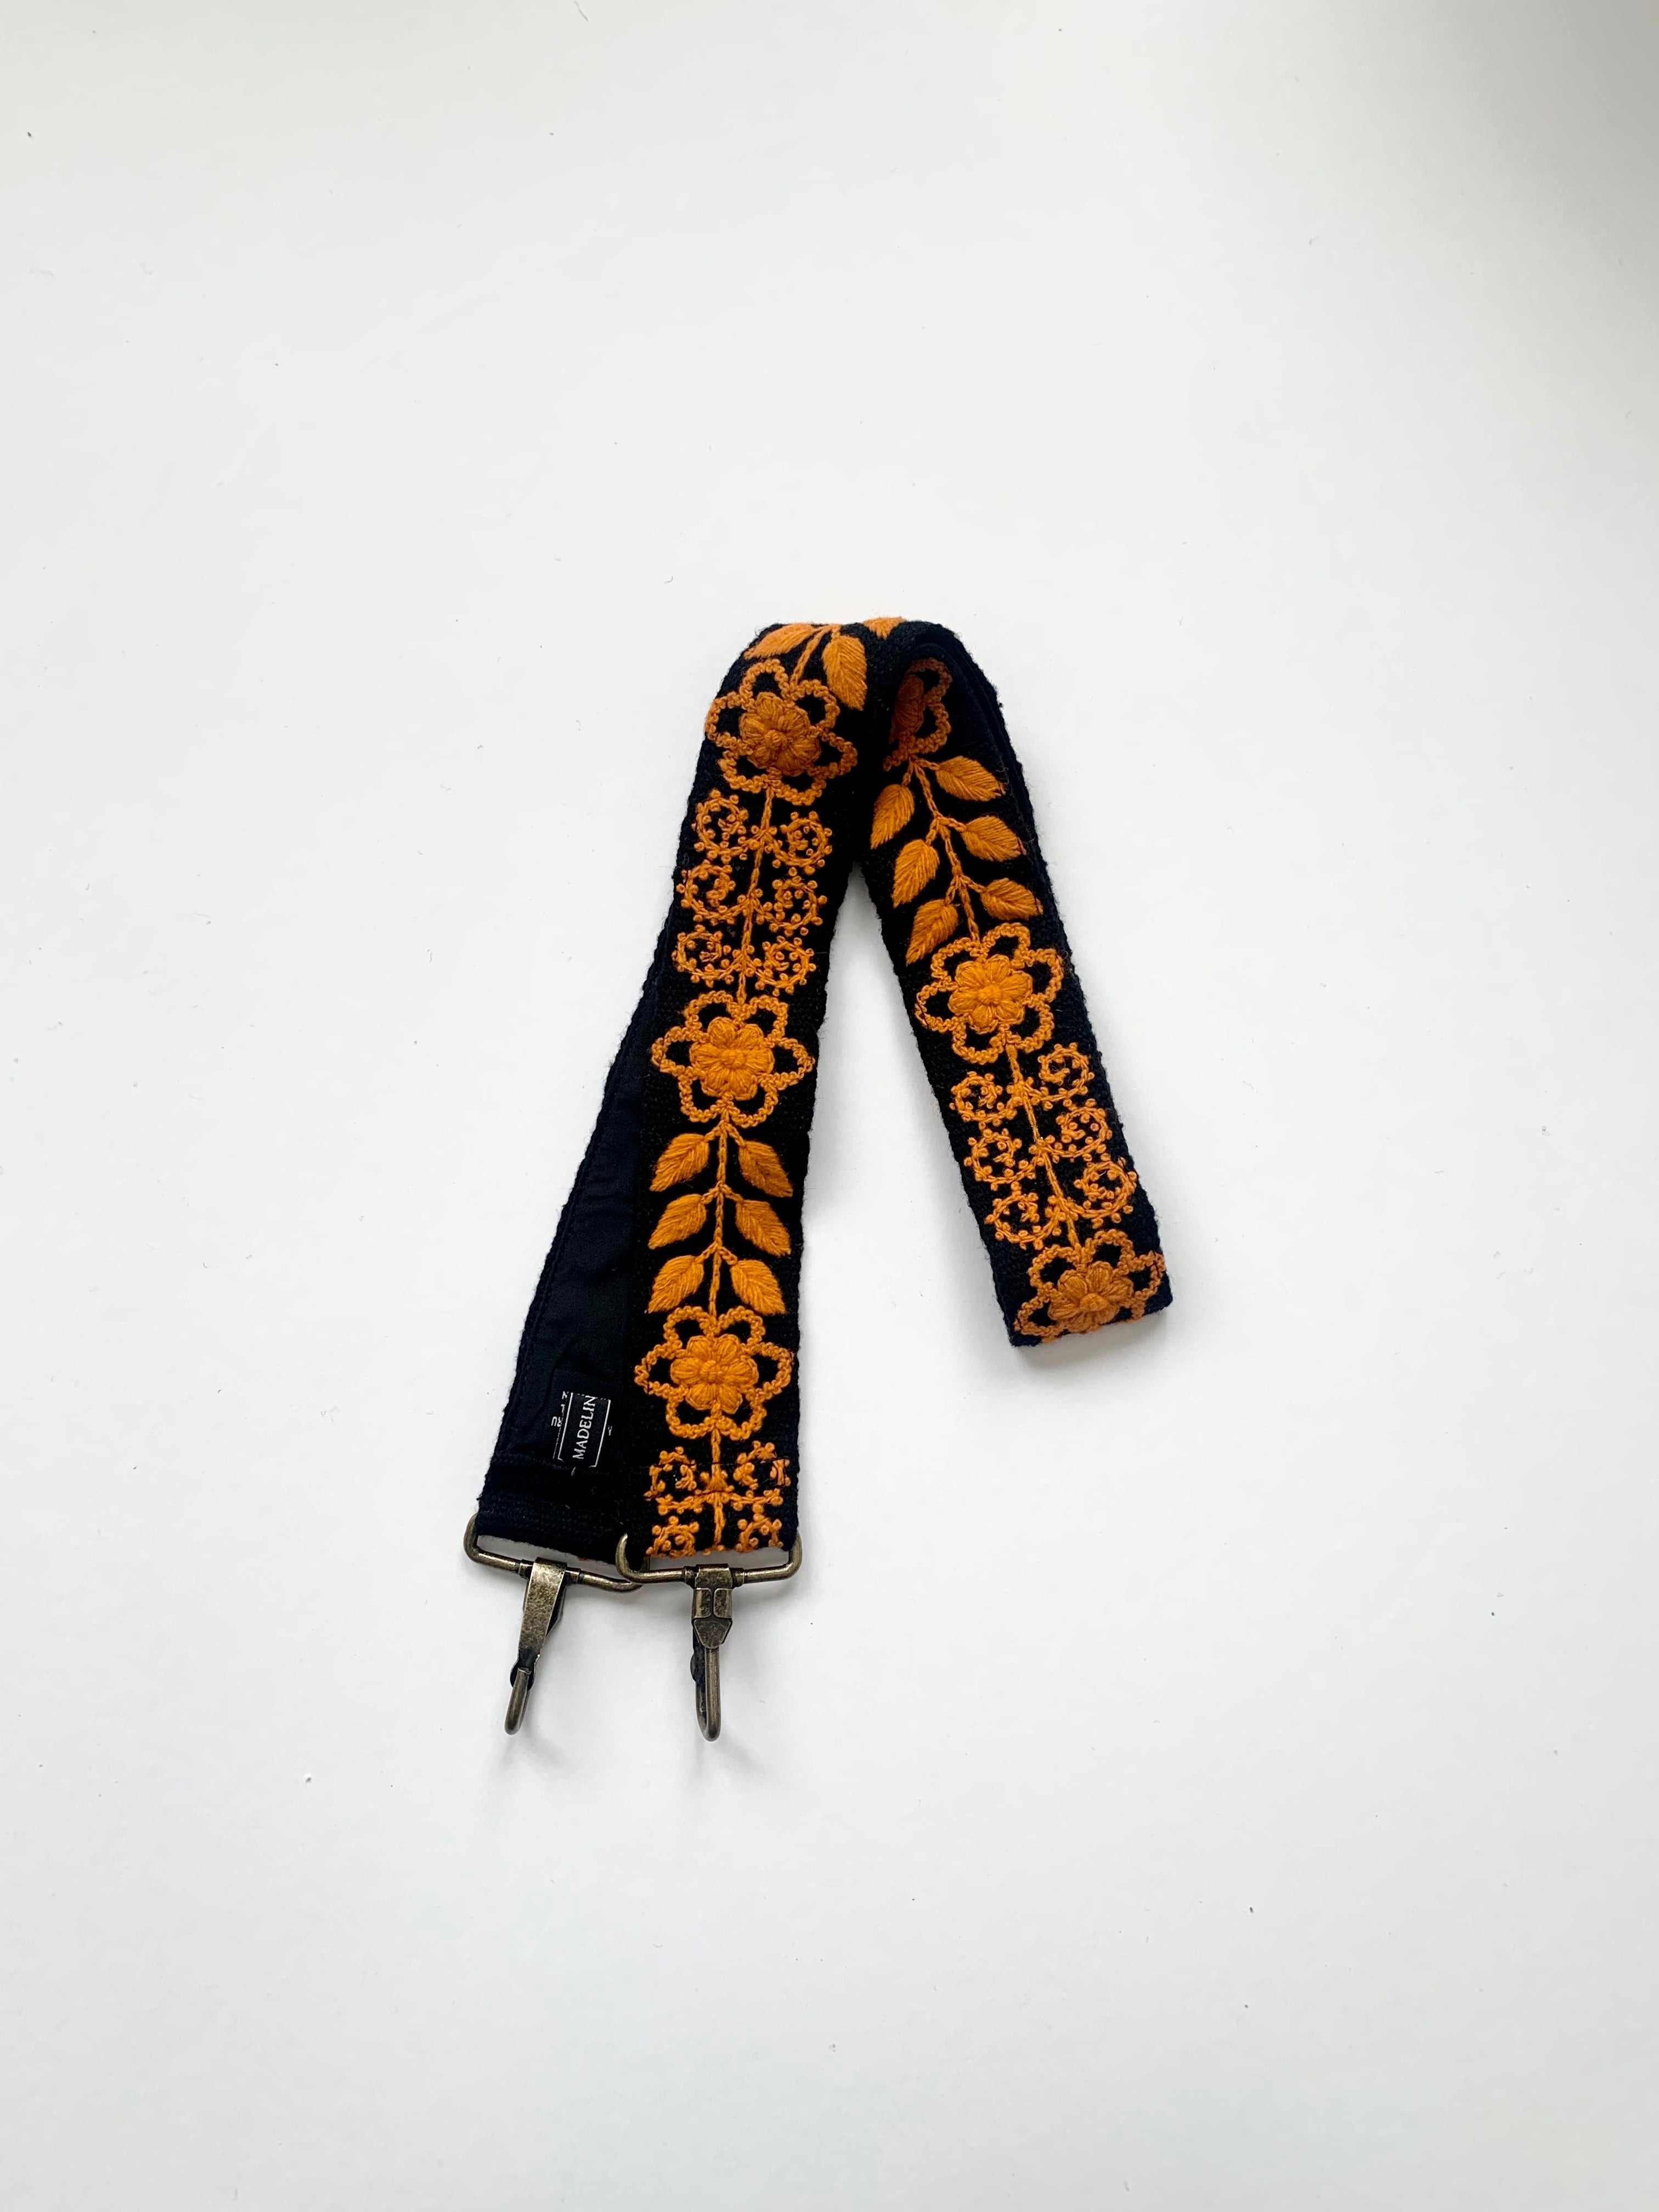 Hand embroidered and woven black wool fabric with orange floral and leaves design